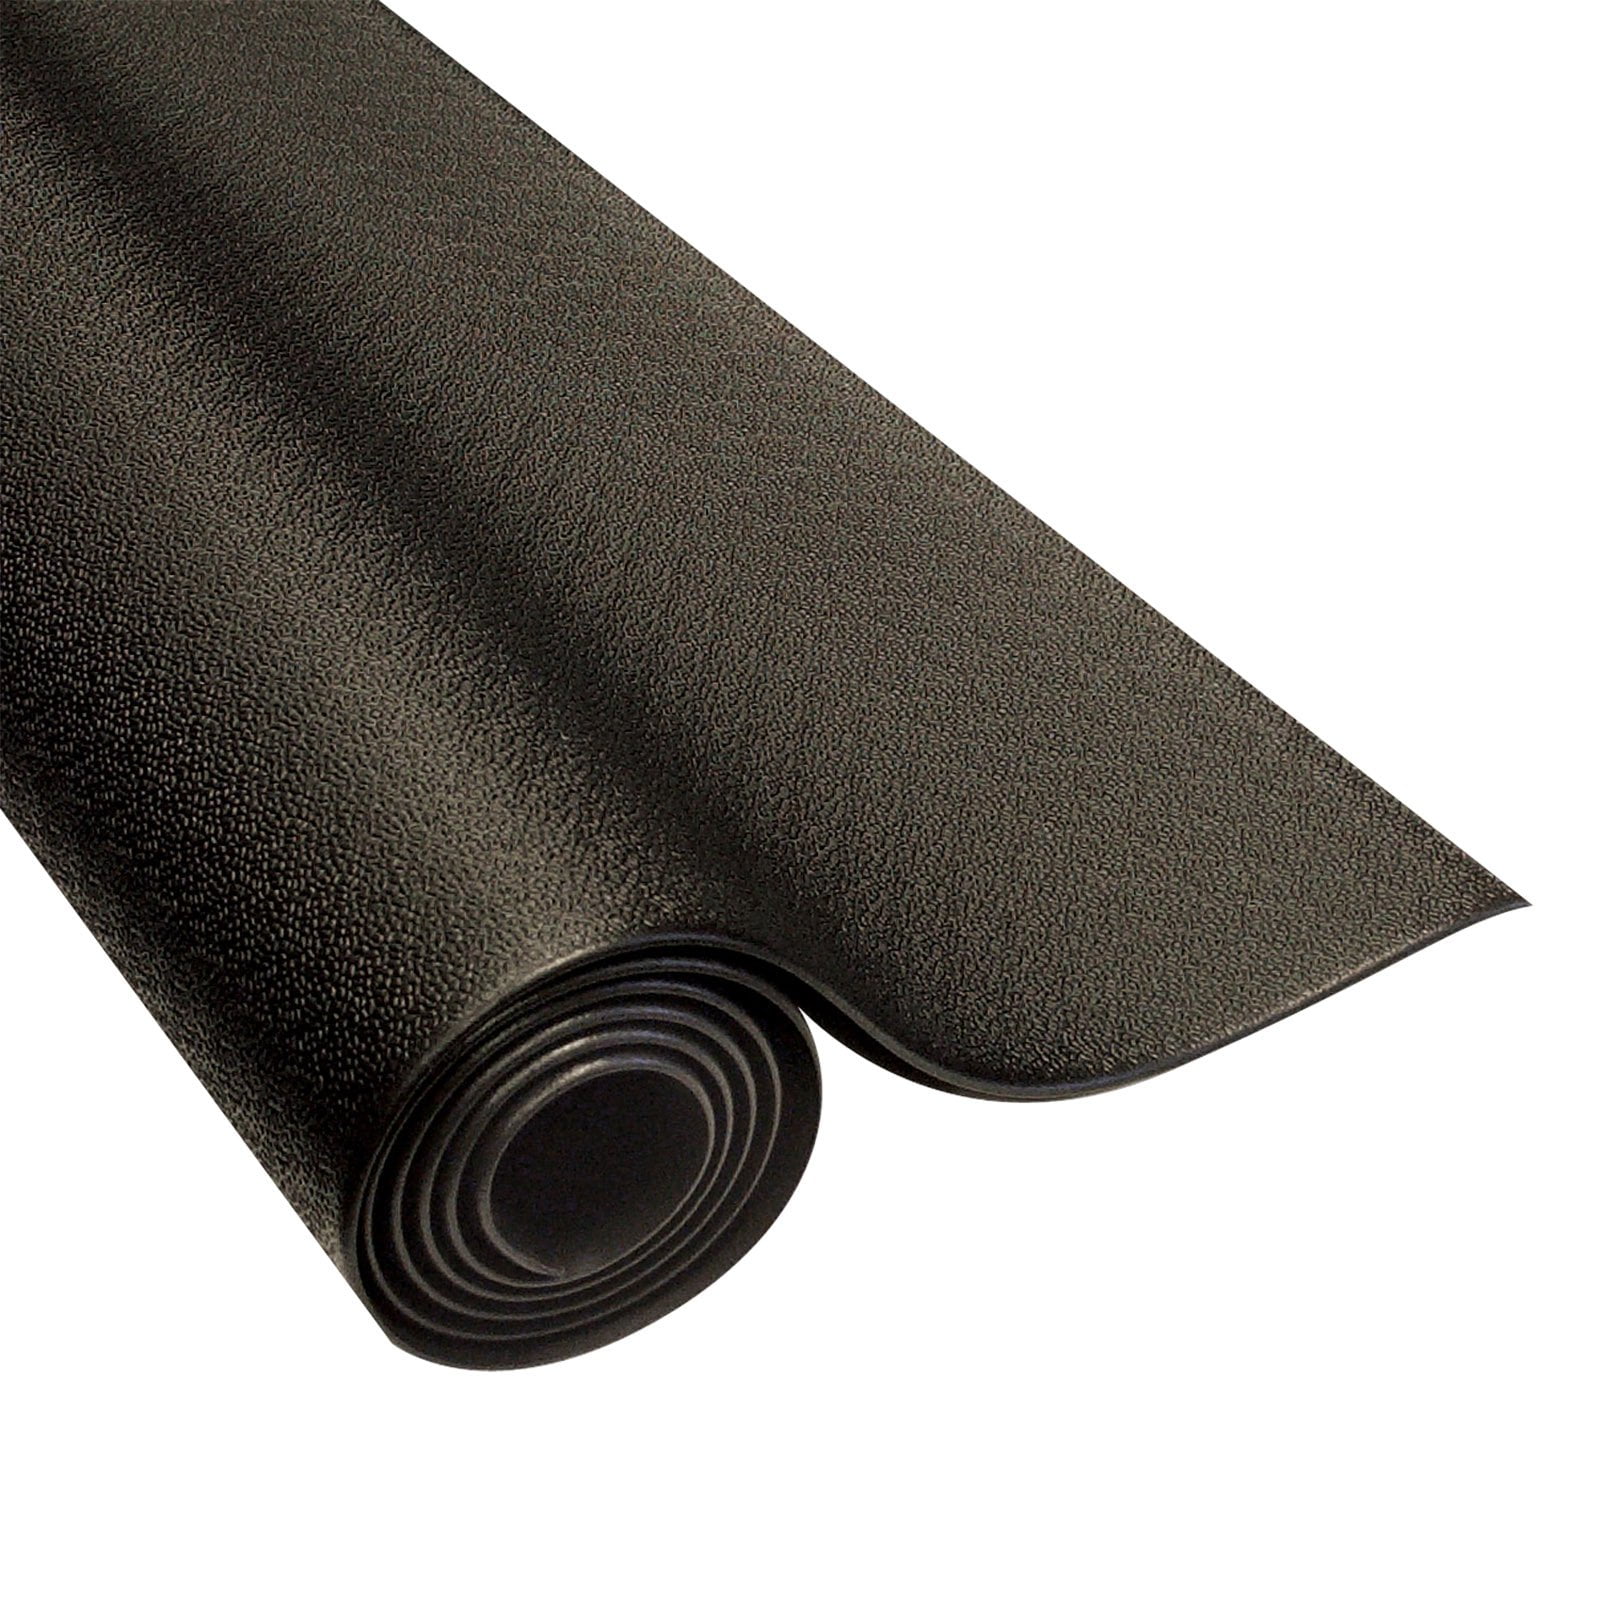 Details about   Rubber Fitness Mat Floor Protector For Treadmills Cushioning Pad Sports Gear 